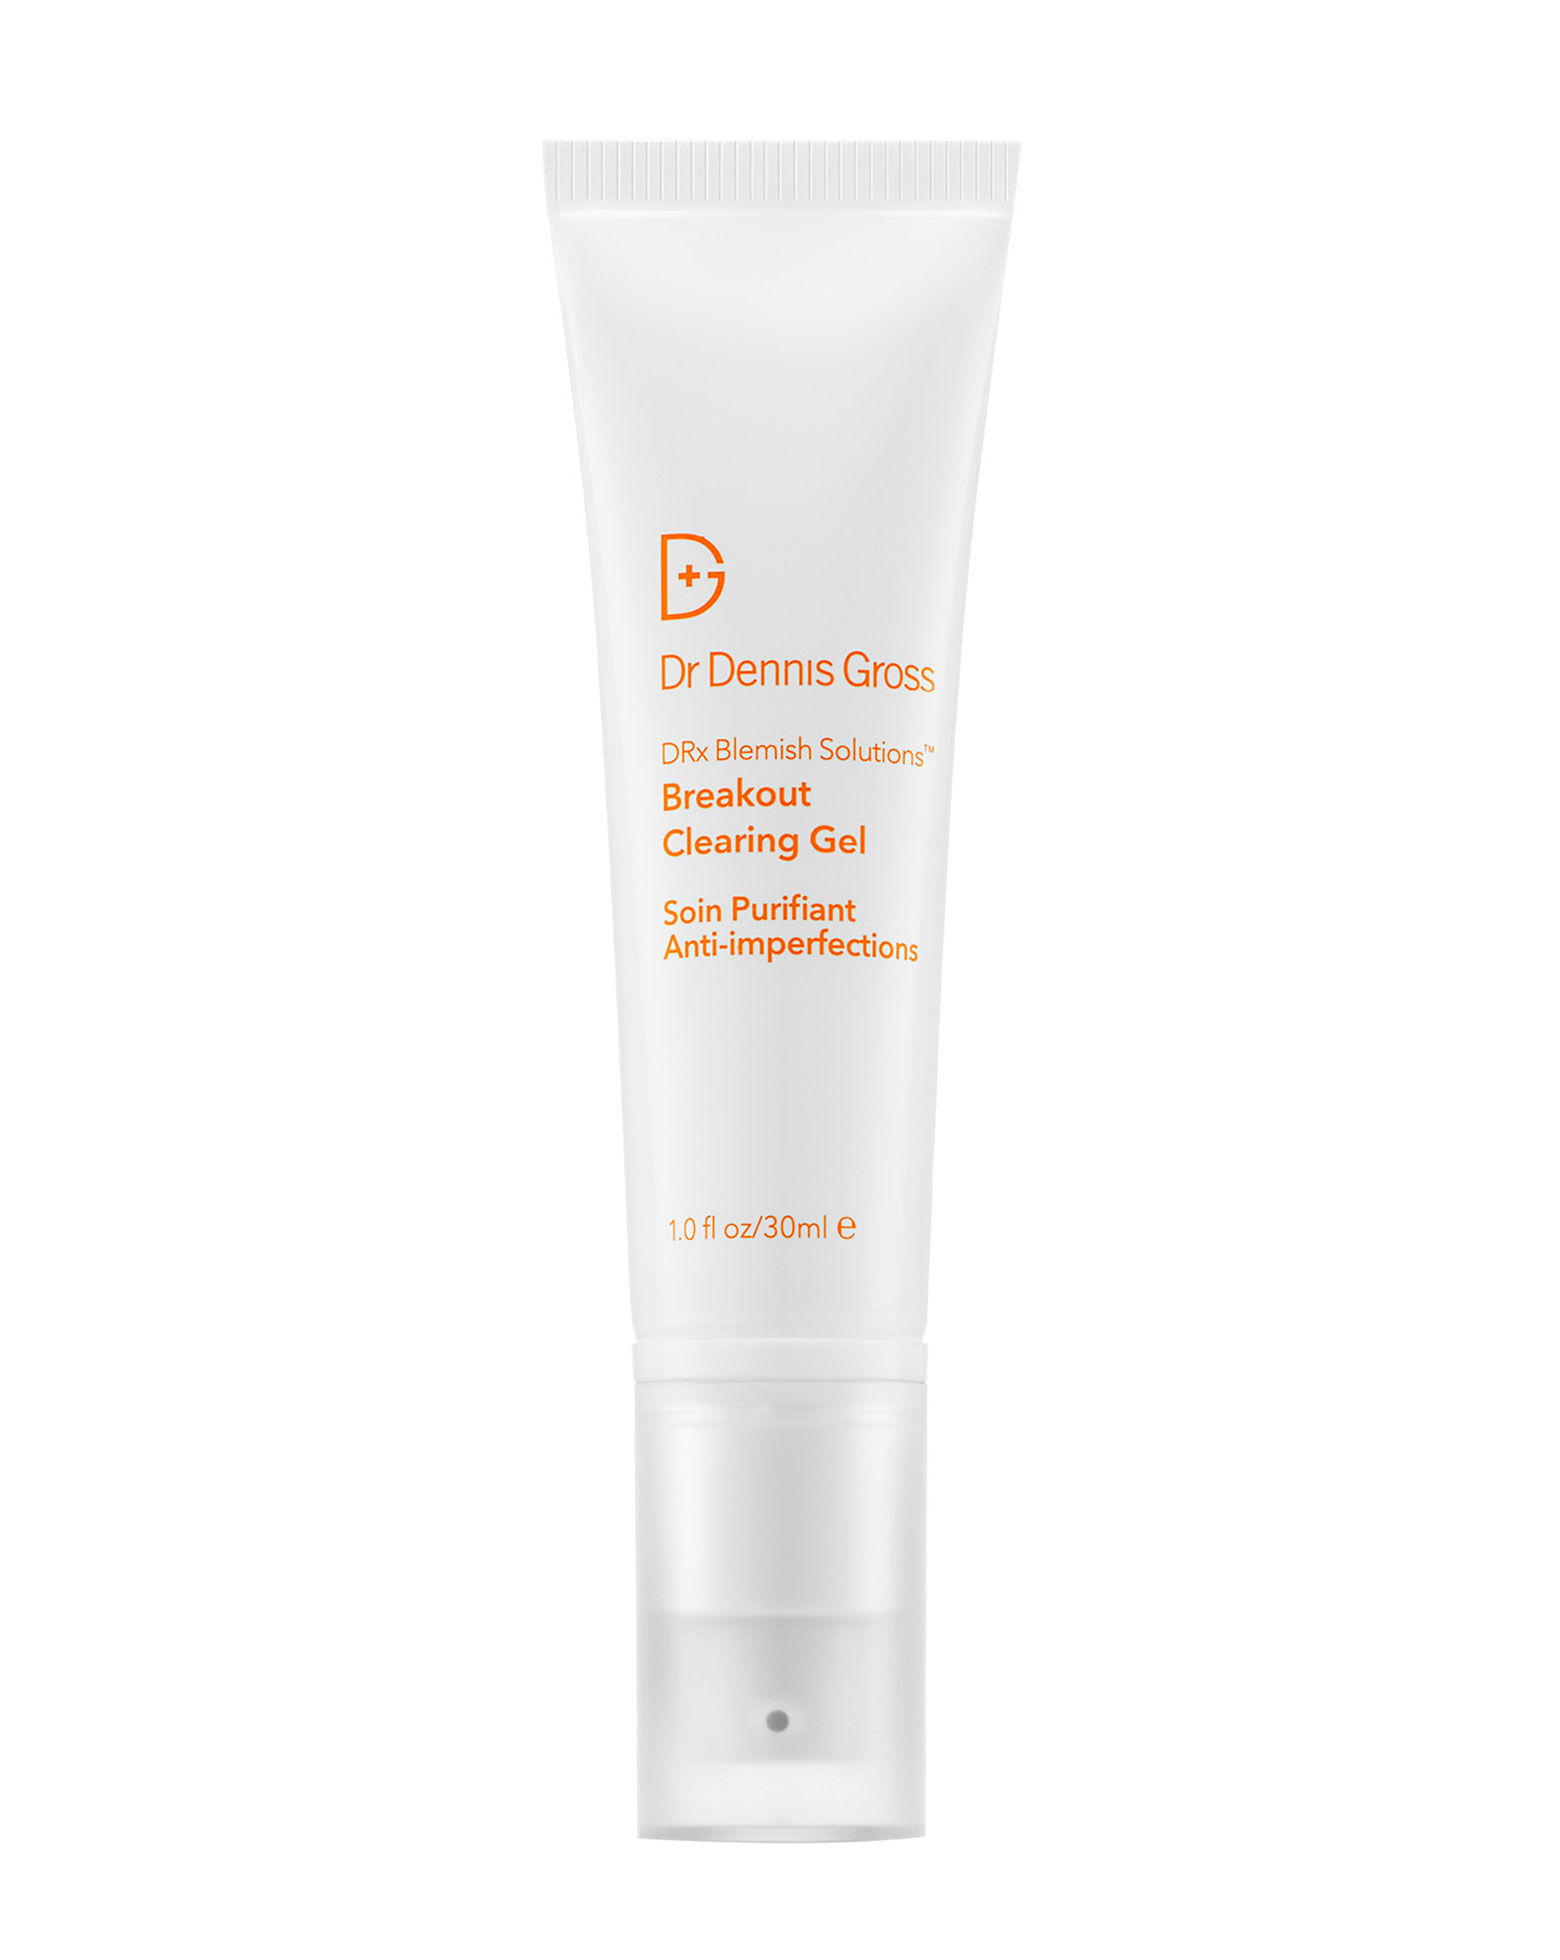 Dr Dennis Gross - DRx Blemish Solutions Breakout Clearing Gel